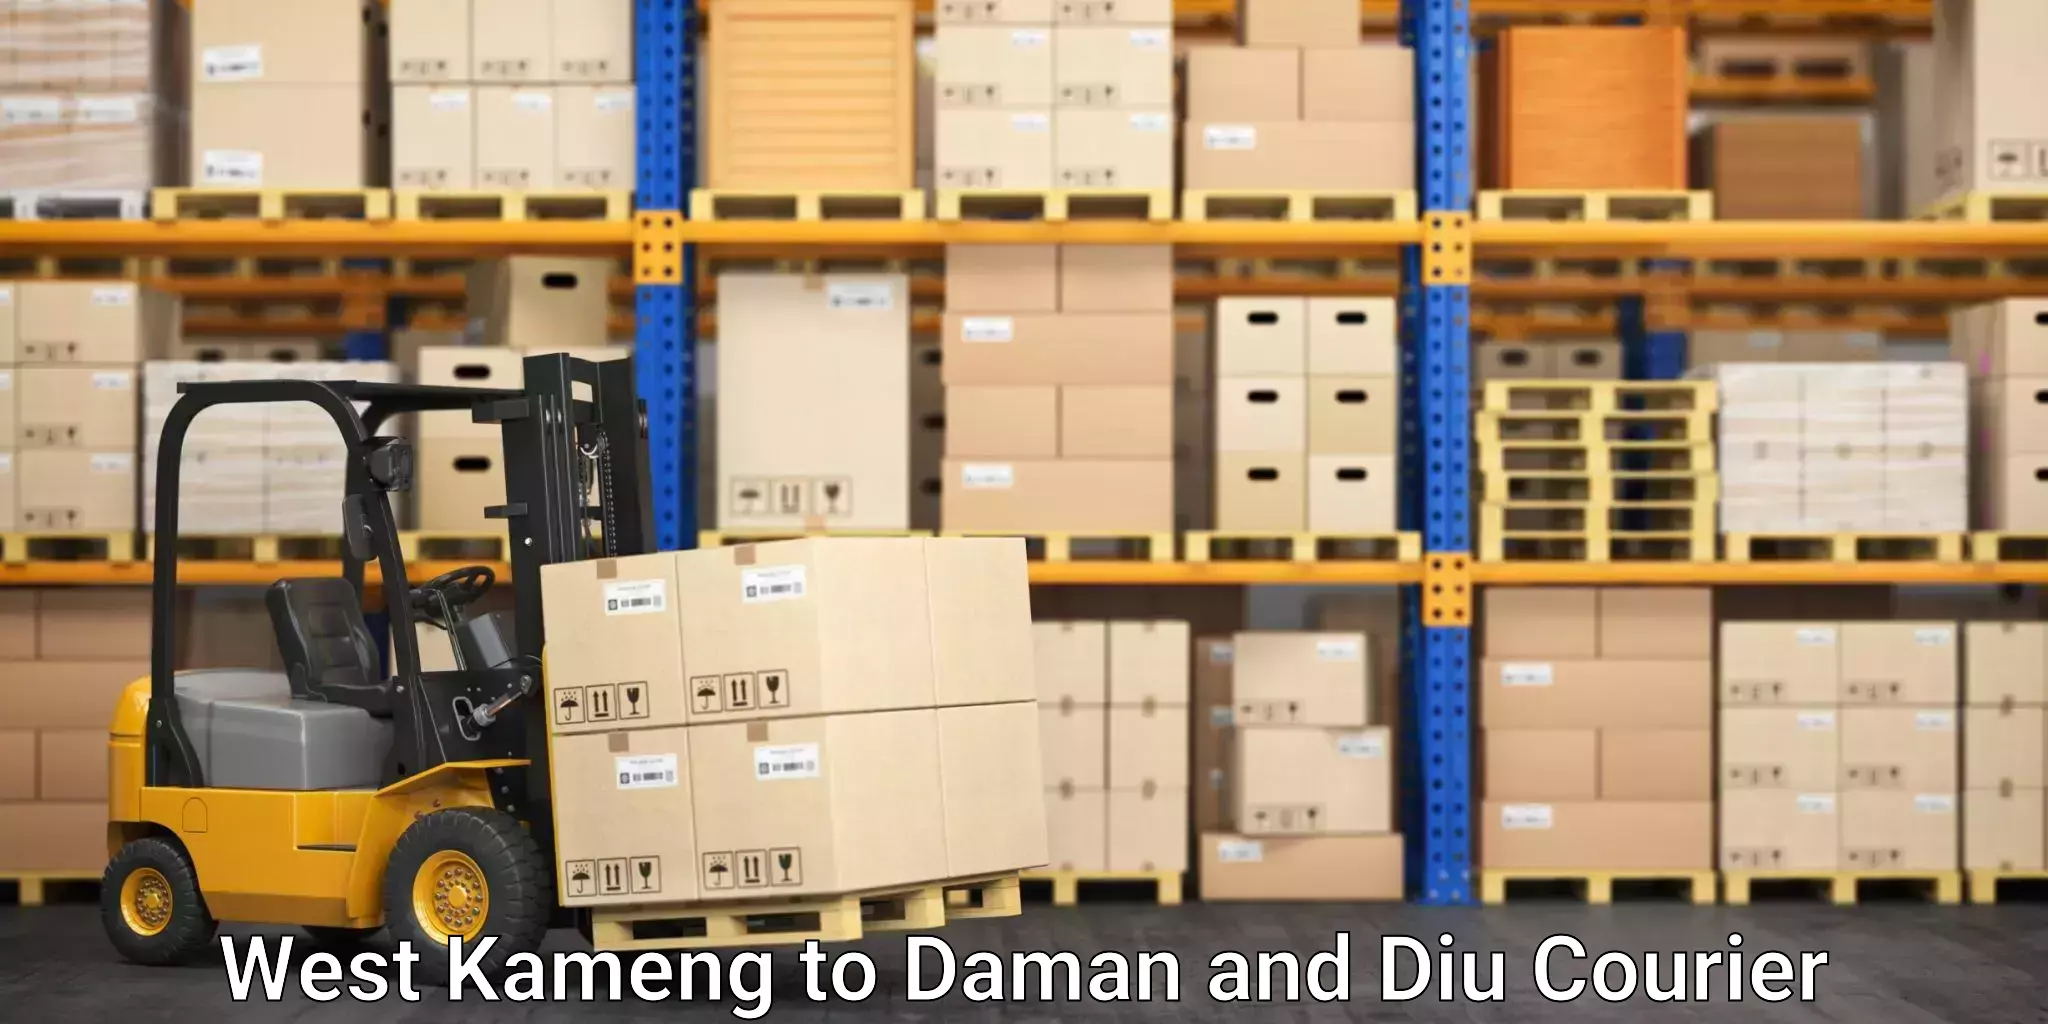 Same-day delivery solutions West Kameng to Diu